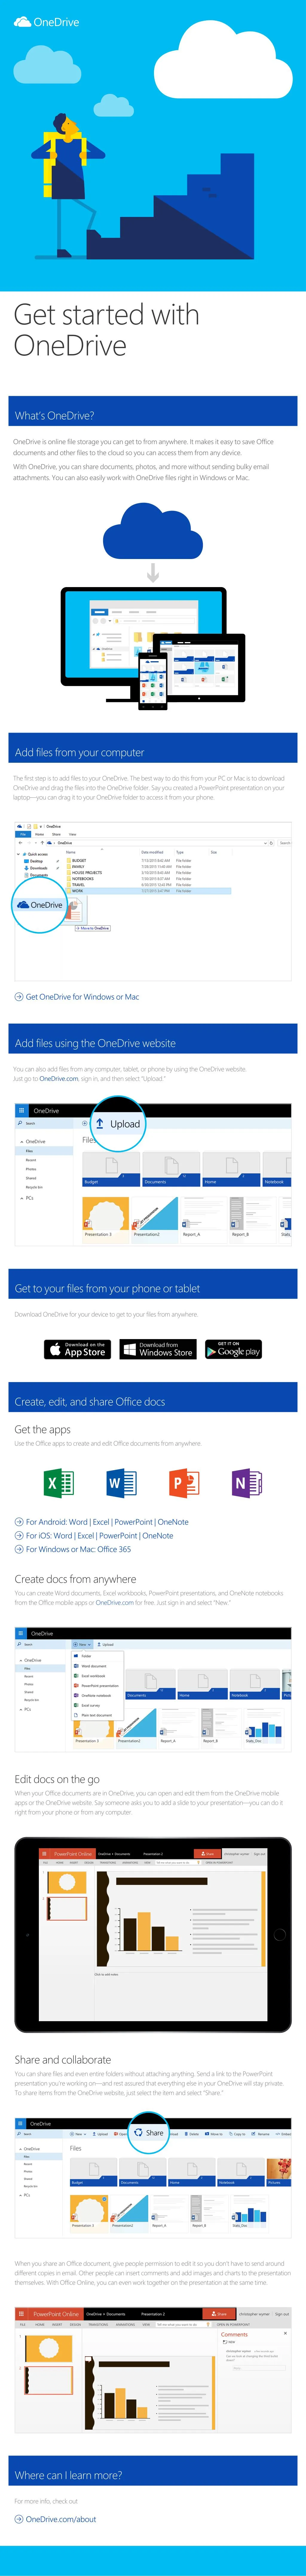 get started with onedrive